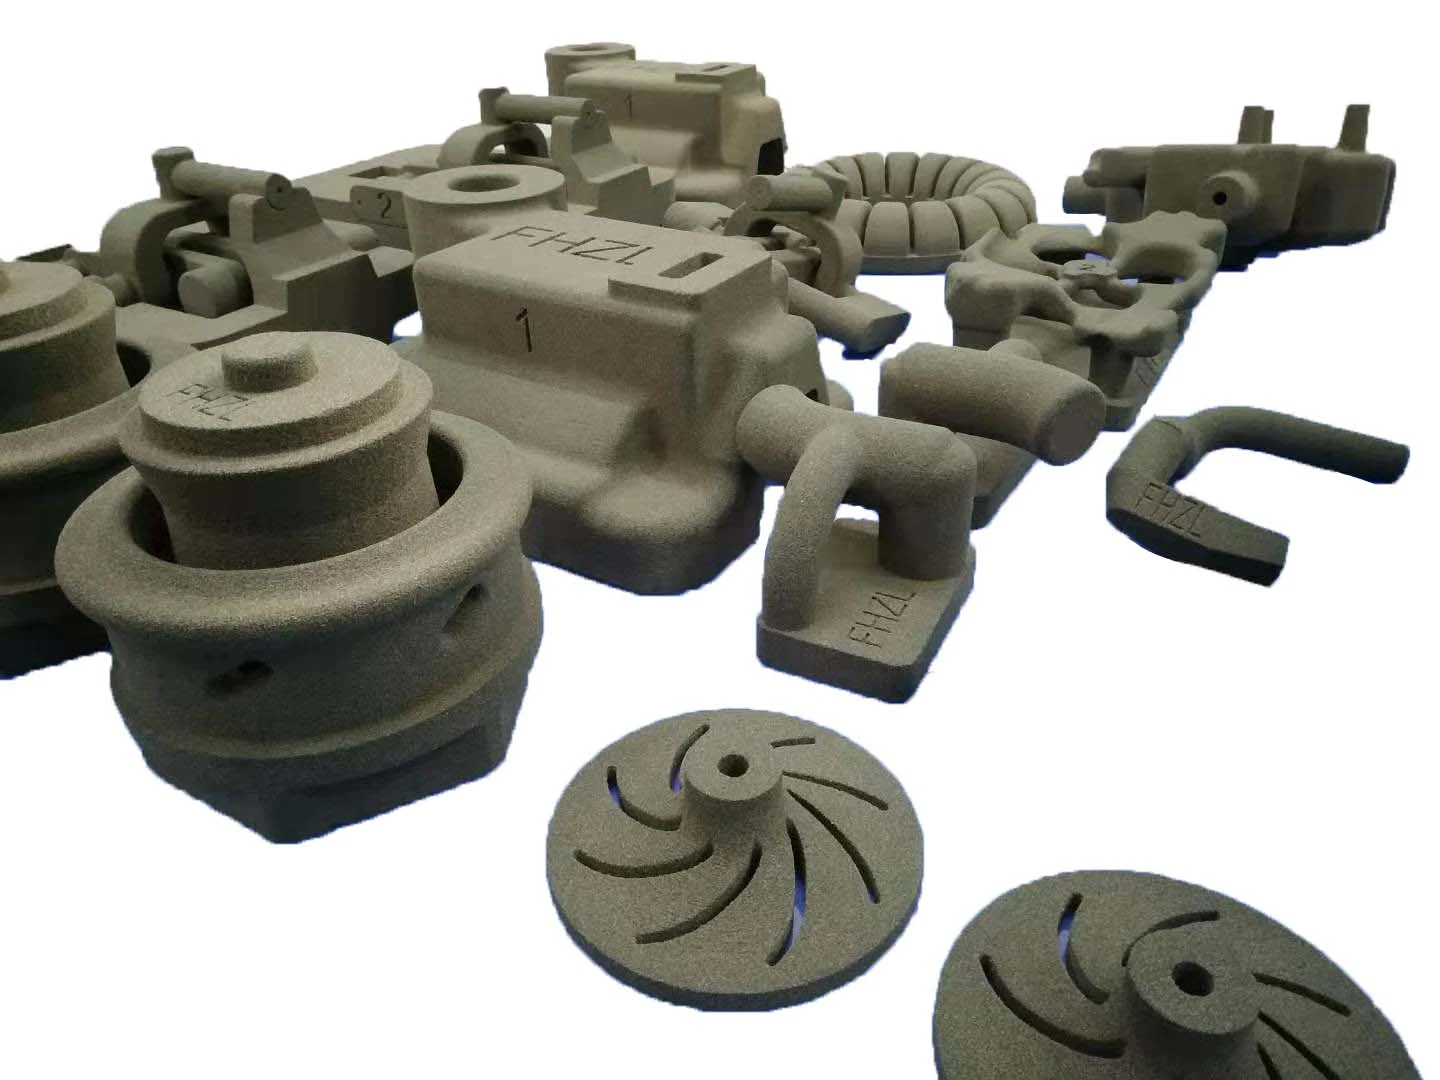 Sand Core for Casting Machining Prototype Without Metal Mold or Wood Mold No Mold Cost